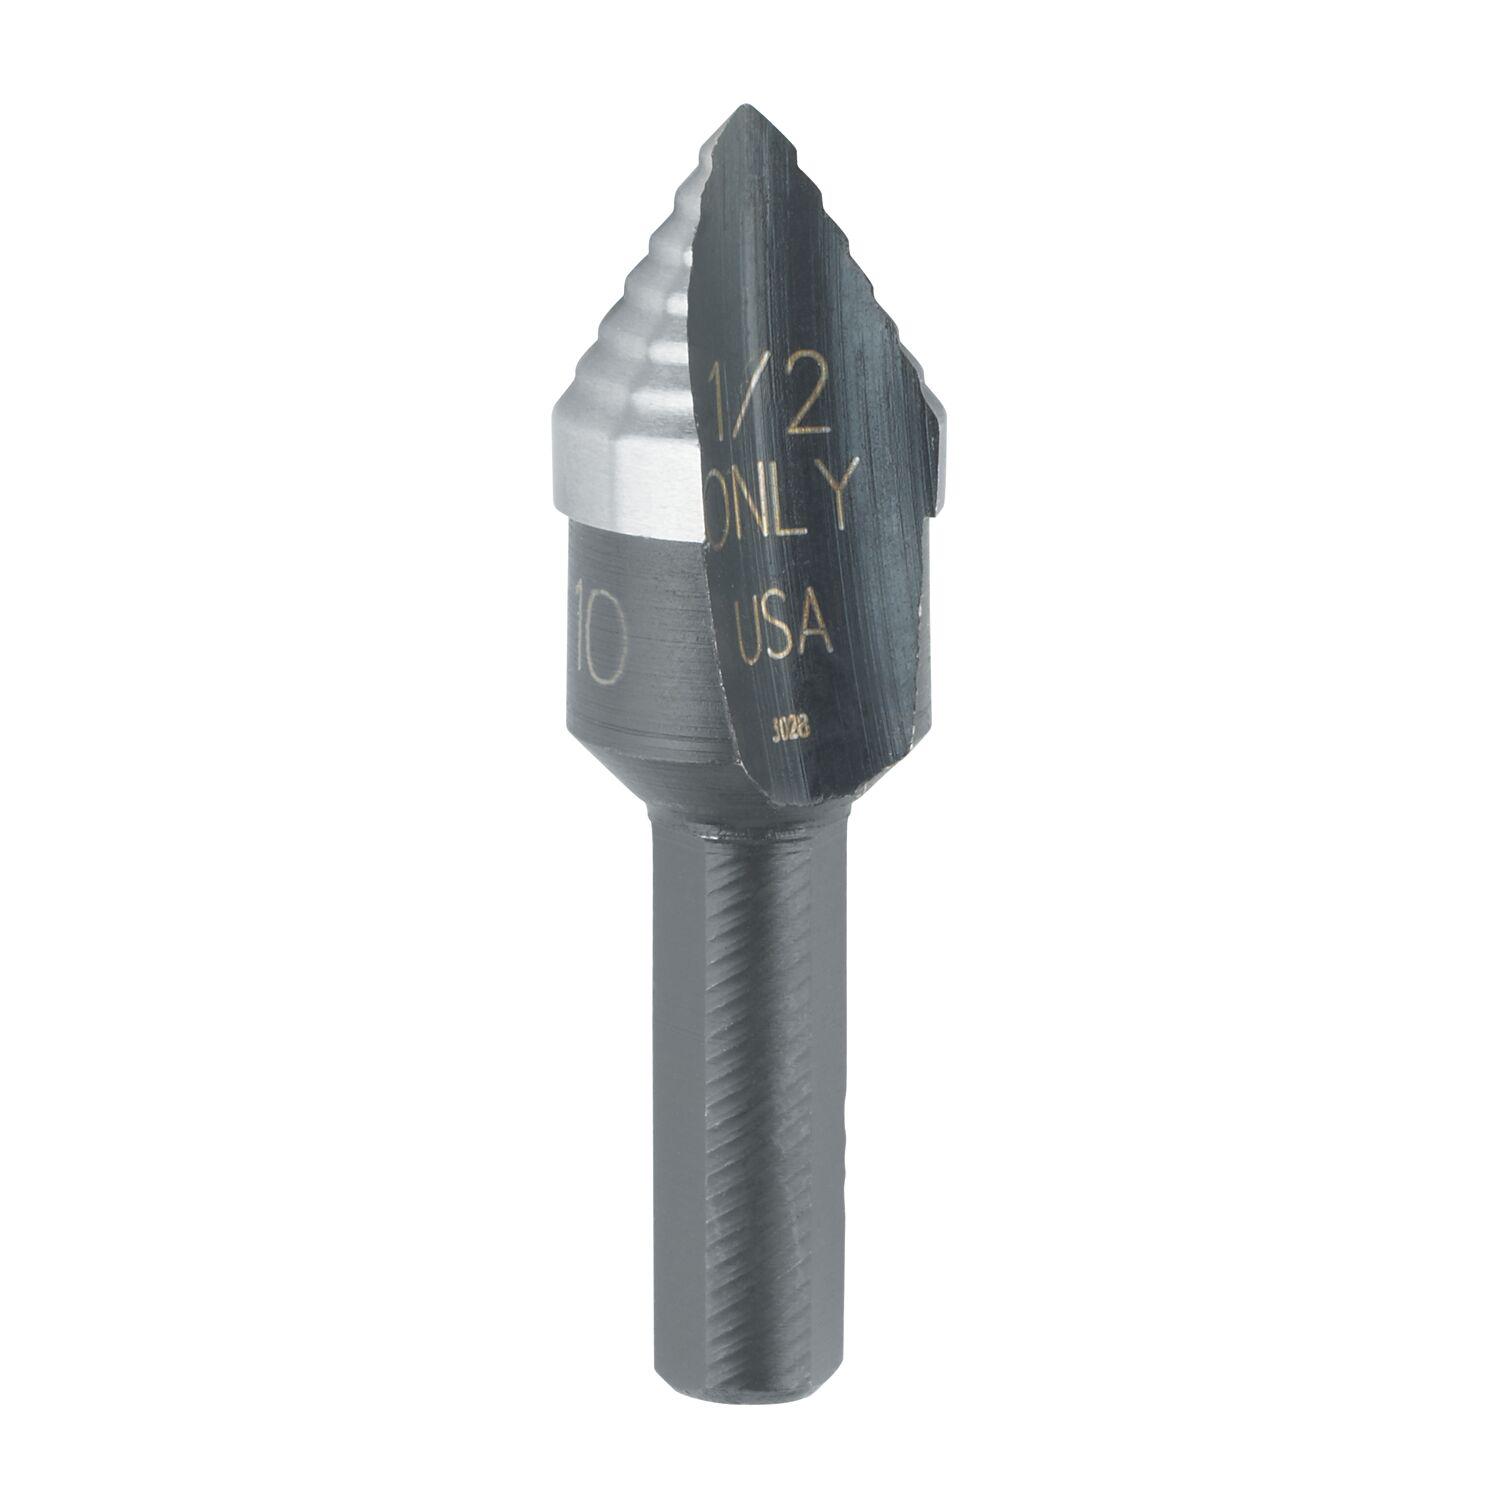 Irwin® Unibit® 10233 Self-Starting Step Drill Bit, 1/4 in Dia Min Hole, 3/4 in Dia Max Hole, 9 Steps, 9 Hole Sizes, 3/8 in Shank